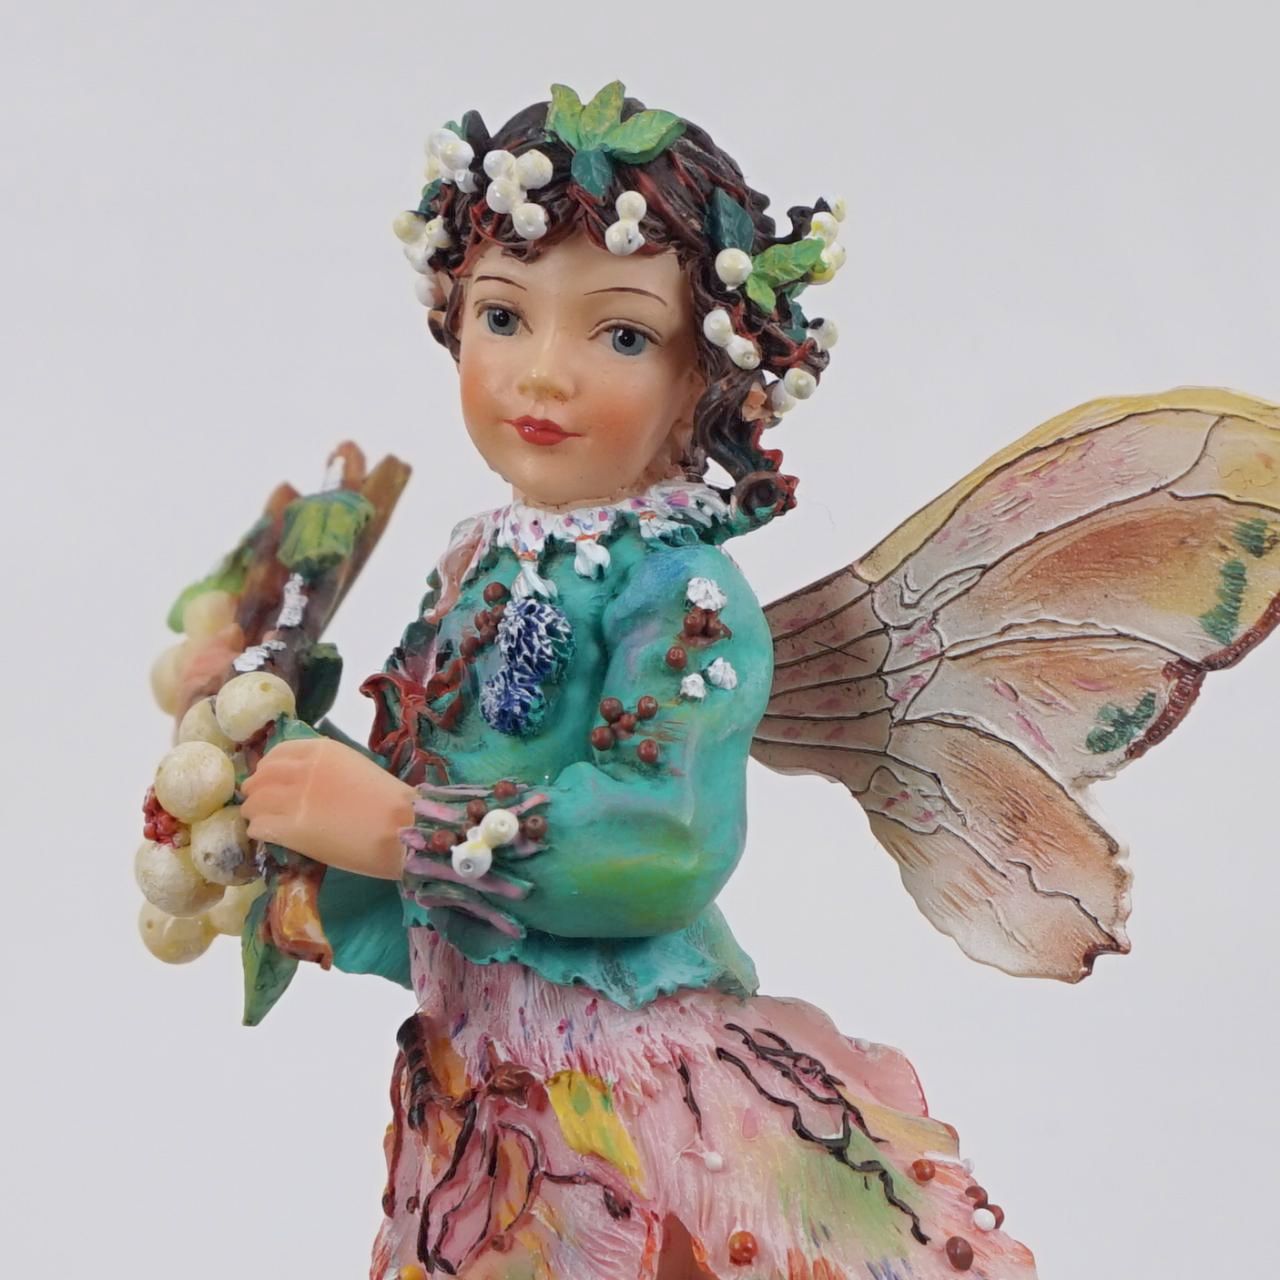 Crisalis Collection★ The Snowberry Faerie (1-4130) 10% OFF